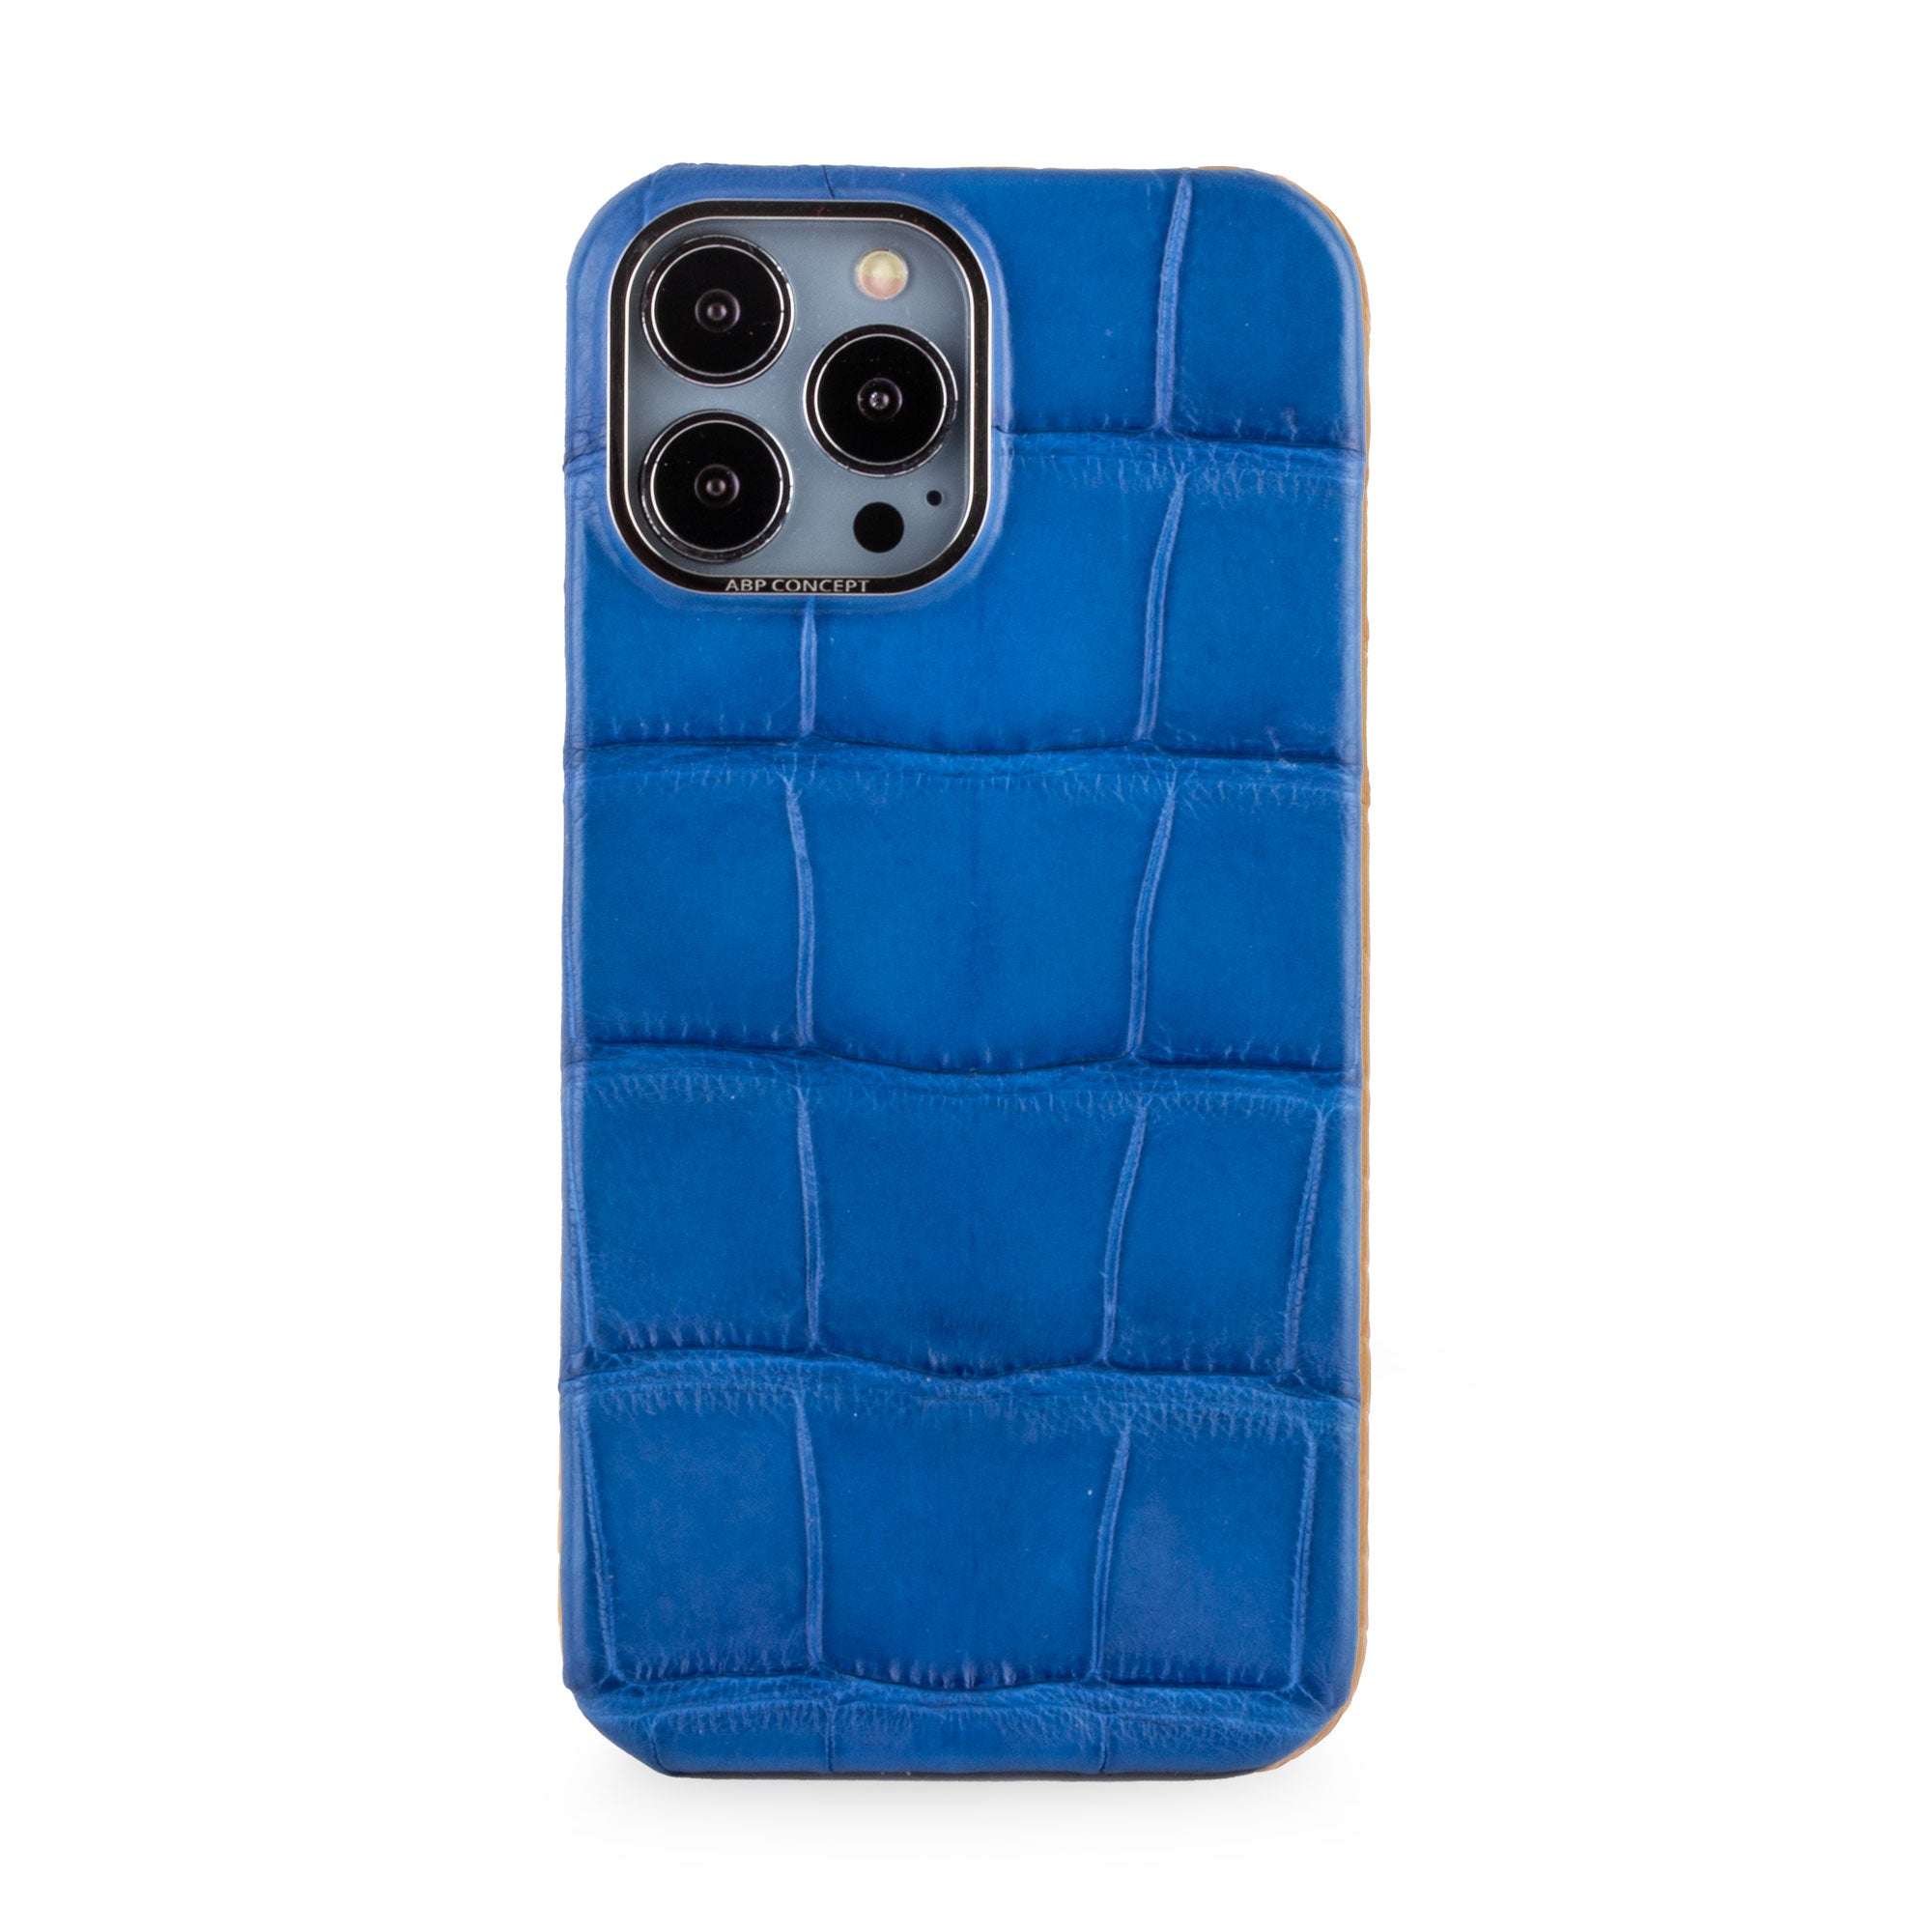 Clearance Sale - Leather iPhone case - iPhone 13 Pro Max - Royal blue alligator 2